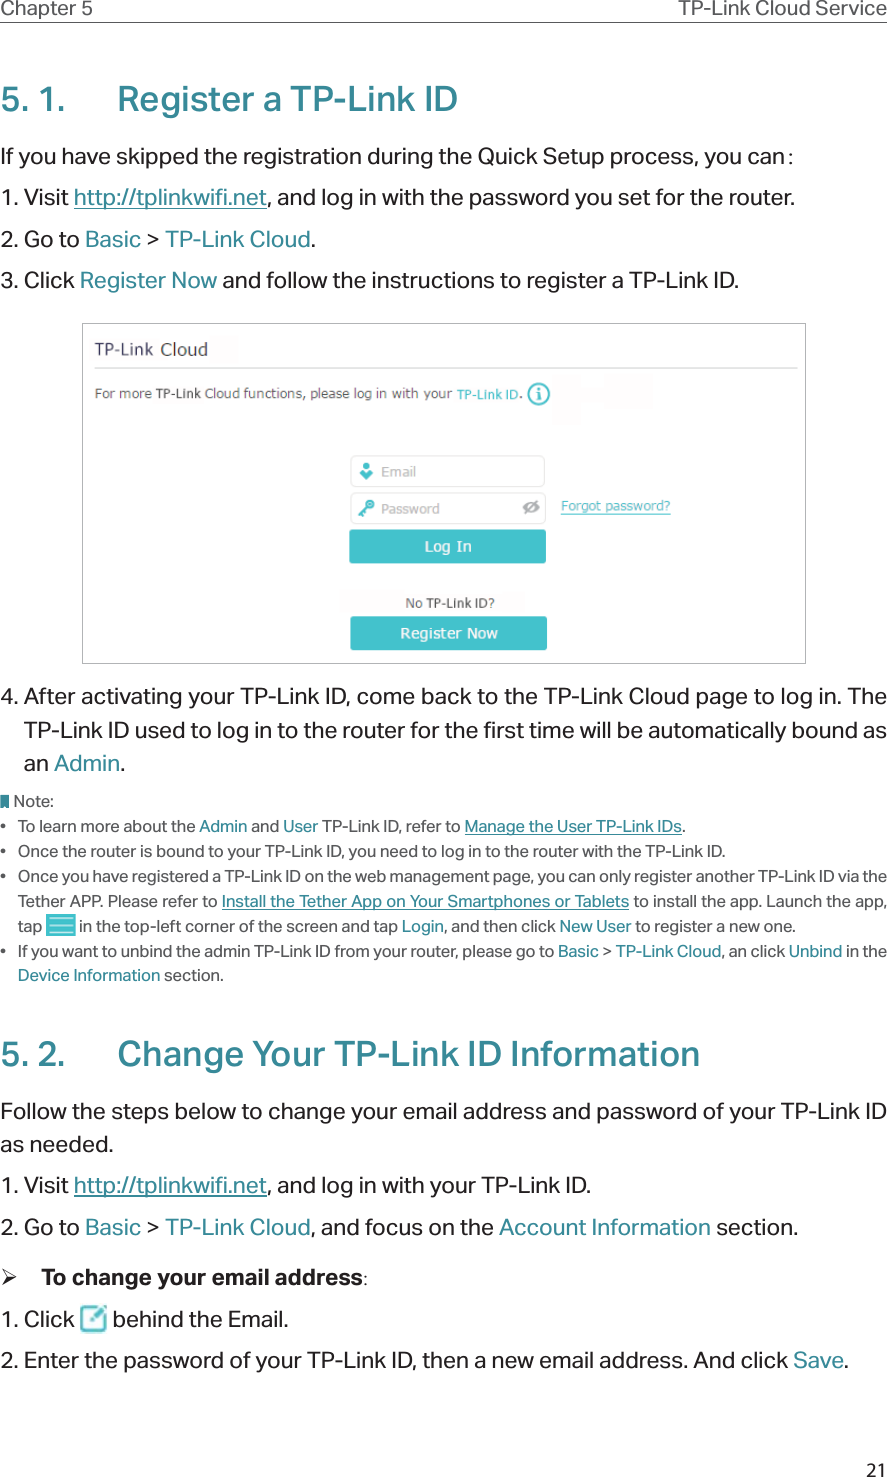 21Chapter 5 TP-Link Cloud Service5. 1.  Register a TP-Link IDIf you have skipped the registration during the Quick Setup process, you can：1. Visit http://tplinkwifi.net, and log in with the password you set for the router.2. Go to Basic &gt; TP-Link Cloud.3. Click Register Now and follow the instructions to register a TP-Link ID.4. After activating your TP-Link ID, come back to the TP-Link Cloud page to log in. The TP-Link ID used to log in to the router for the first time will be automatically bound as an Admin. Note:•  To learn more about the Admin and User TP-Link ID, refer to Manage the User TP-Link IDs.•  Once the router is bound to your TP-Link ID, you need to log in to the router with the TP-Link ID. •  Once you have registered a TP-Link ID on the web management page, you can only register another TP-Link ID via the Tether APP. Please refer to Install the Tether App on Your Smartphones or Tablets to install the app. Launch the app, tap   in the top-left corner of the screen and tap Login, and then click New User to register a new one.•  If you want to unbind the admin TP-Link ID from your router, please go to Basic &gt; TP-Link Cloud, an click Unbind in the Device Information section.5. 2.  Change Your TP-Link ID InformationFollow the steps below to change your email address and password of your TP-Link ID as needed.1. Visit http://tplinkwifi.net, and log in with your TP-Link ID.2. Go to Basic &gt; TP-Link Cloud, and focus on the Account Information section. ¾To change your email address:1. Click   behind the Email.2. Enter the password of your TP-Link ID, then a new email address. And click Save.